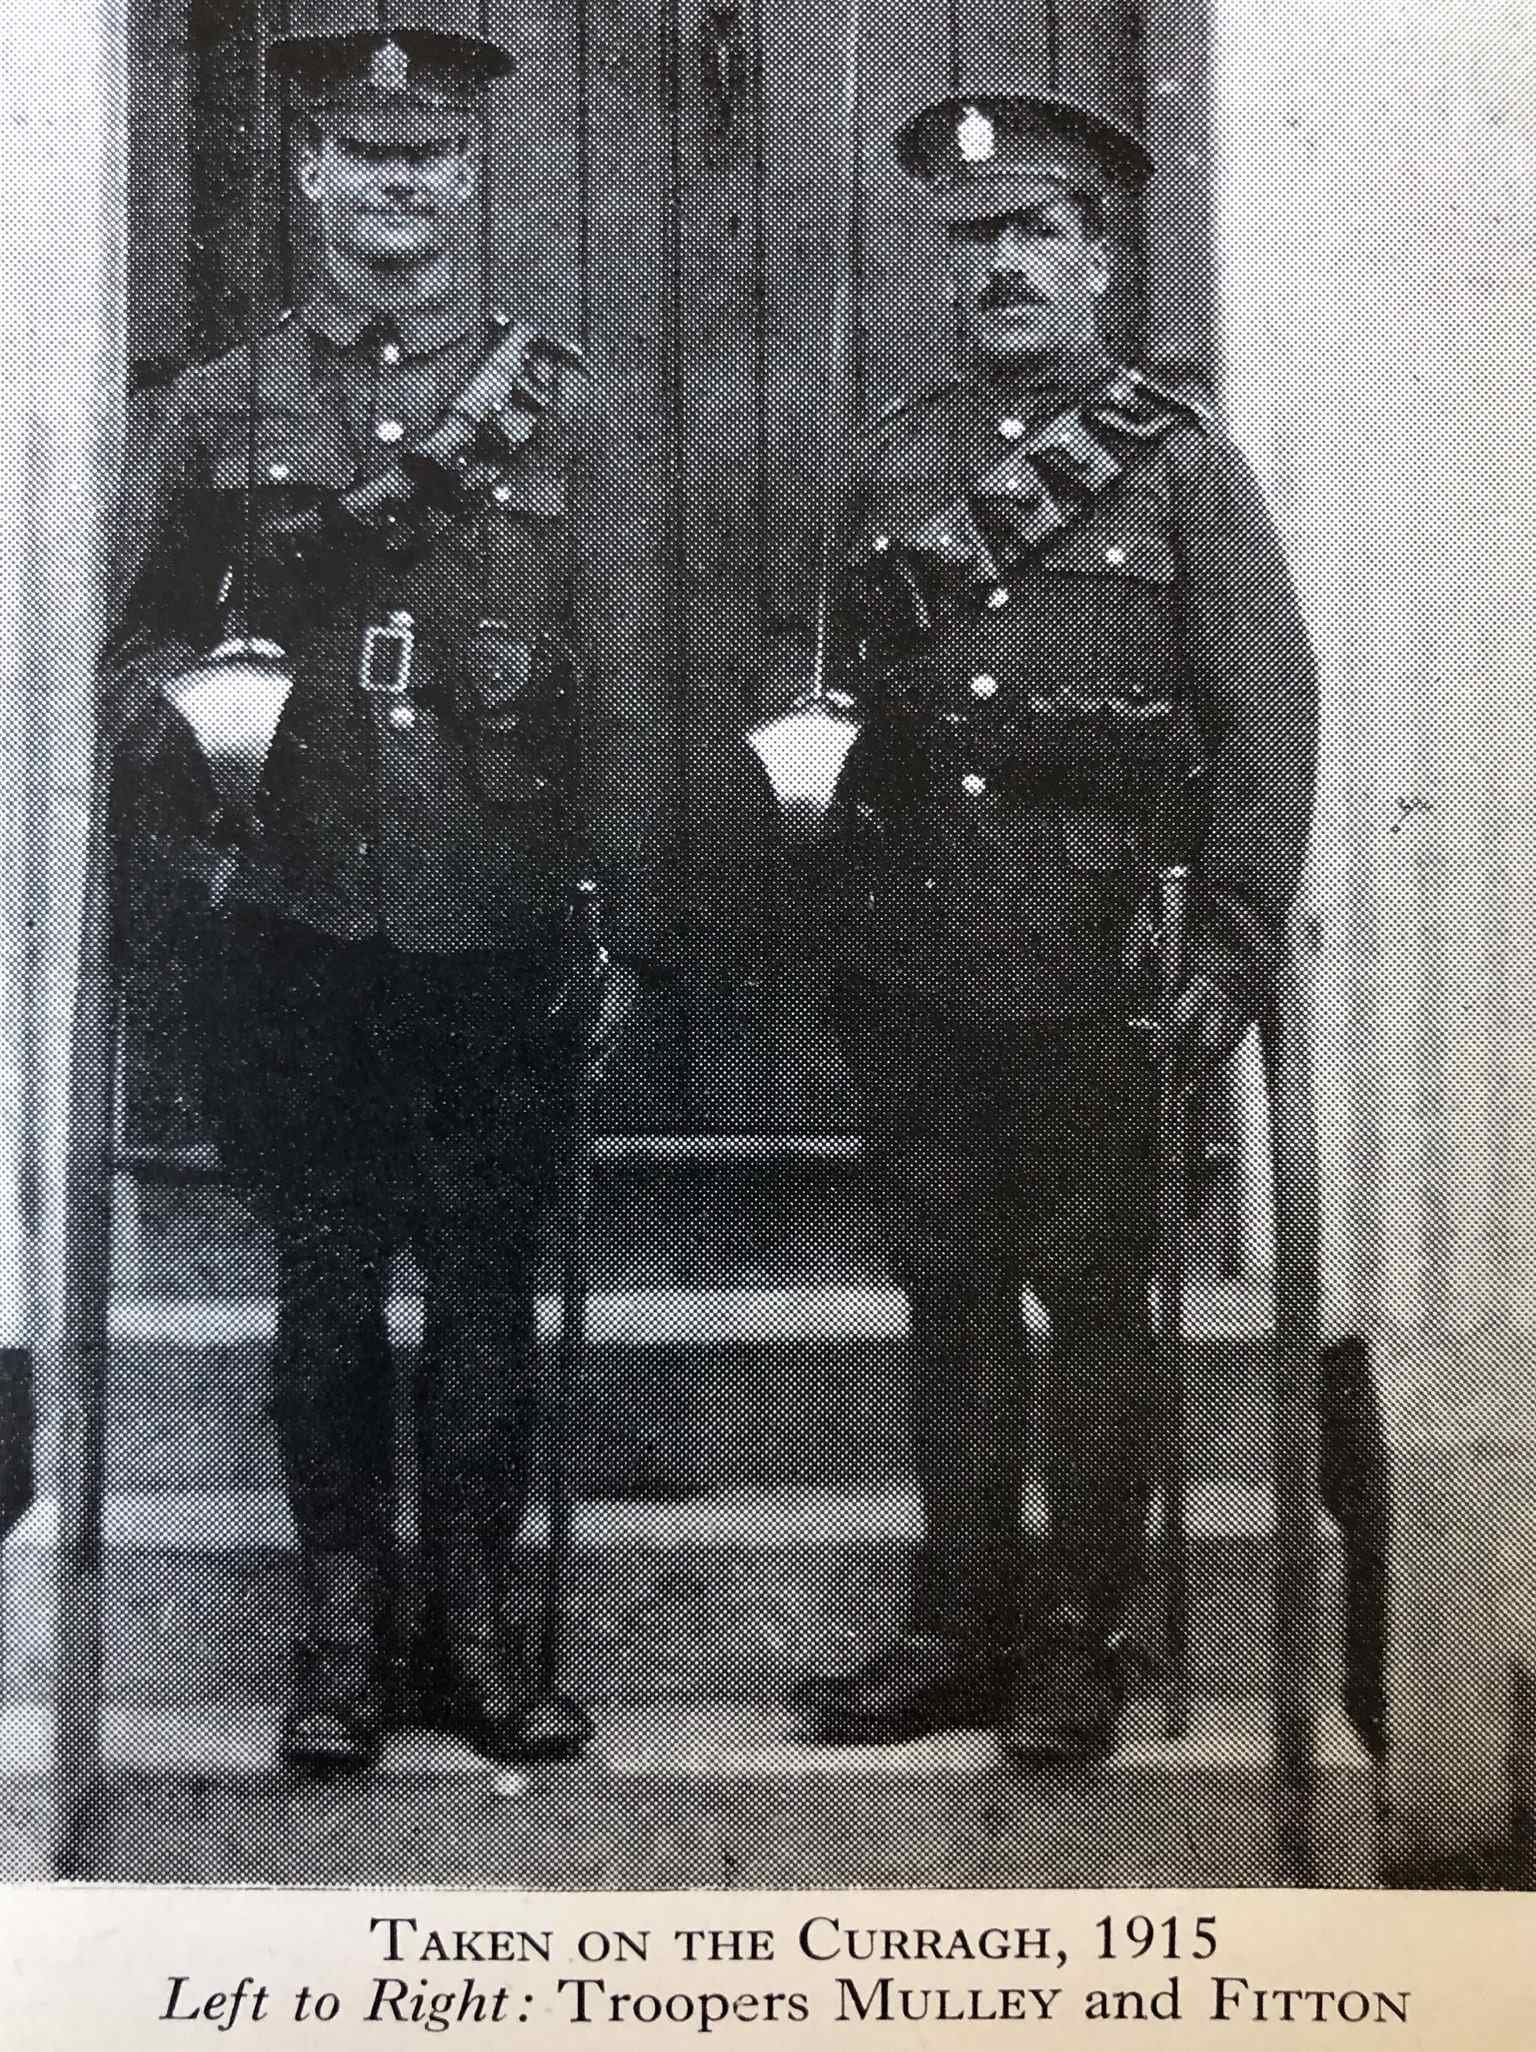 MULLEY, Reginald. 1215. Corporal KEH then Corporal, Royal Fusiliers GS/59470. (On the left). Note they are equipped with 1903 pattern waist belts.